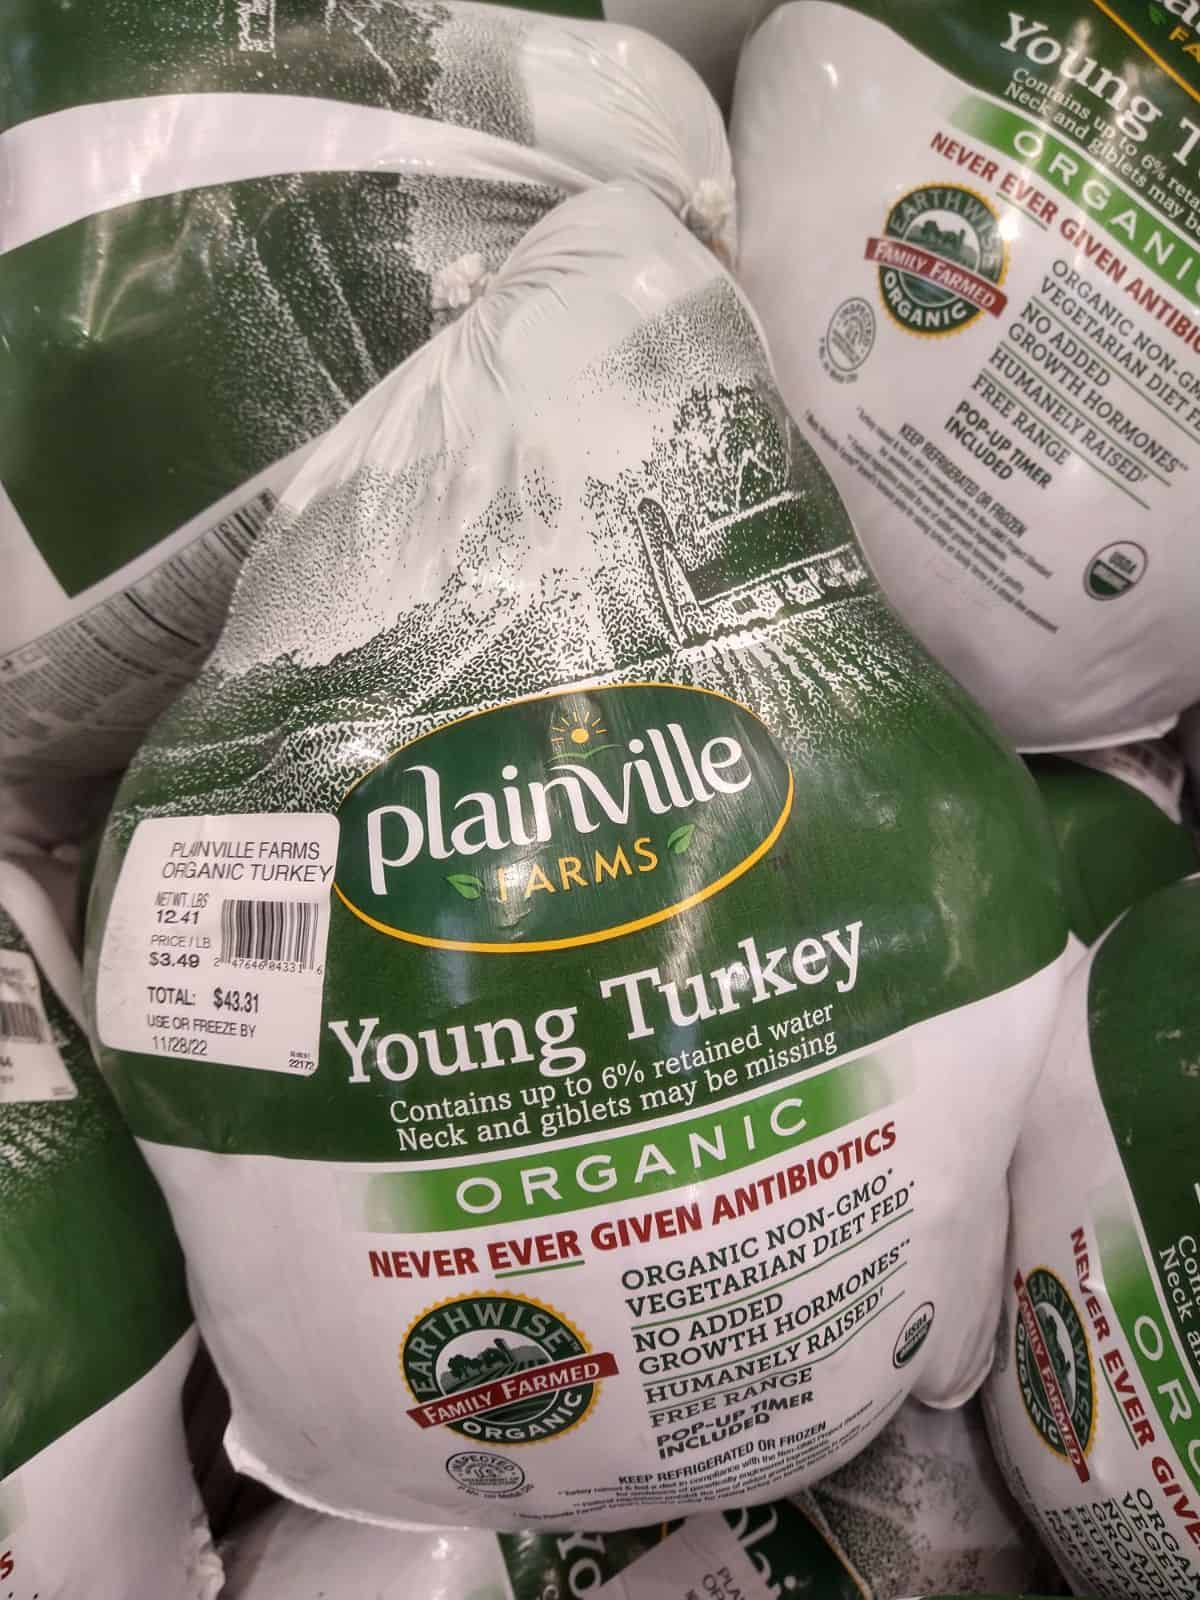 A close up of a display centered on Plainville Organic Young Turkeys.